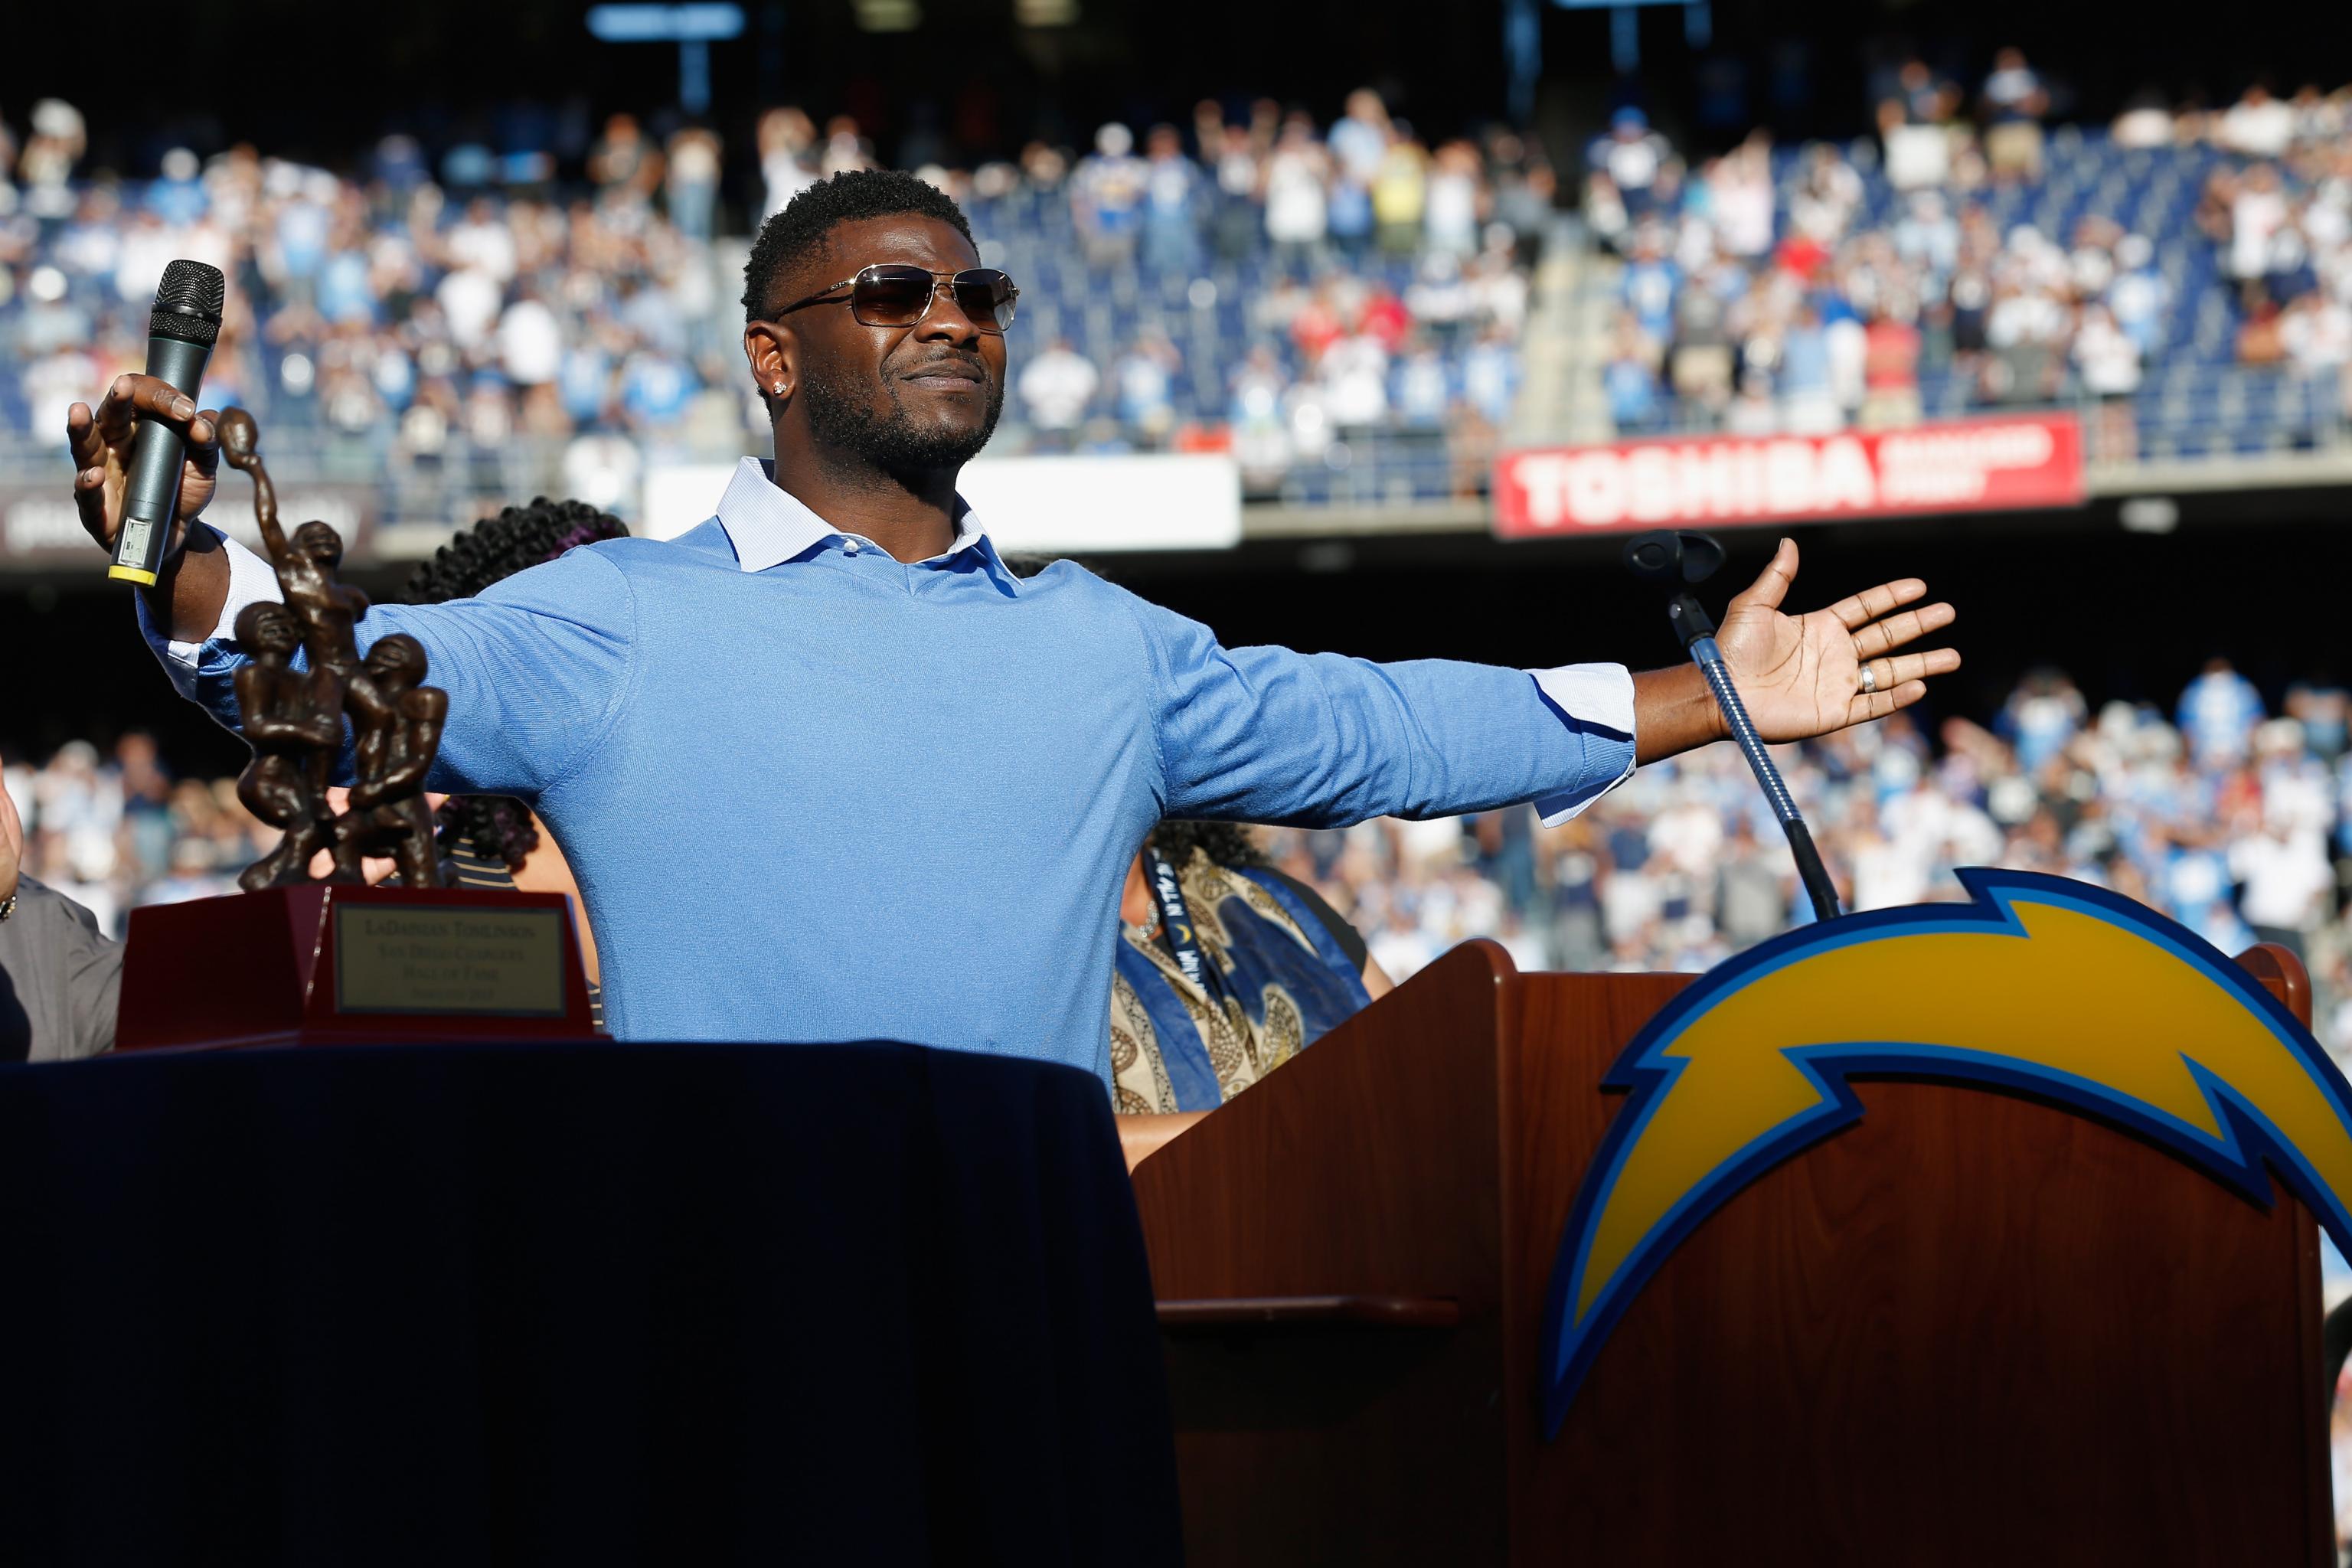 LaDainian Tomlinson loyal to Chargers, San Diego after relocation